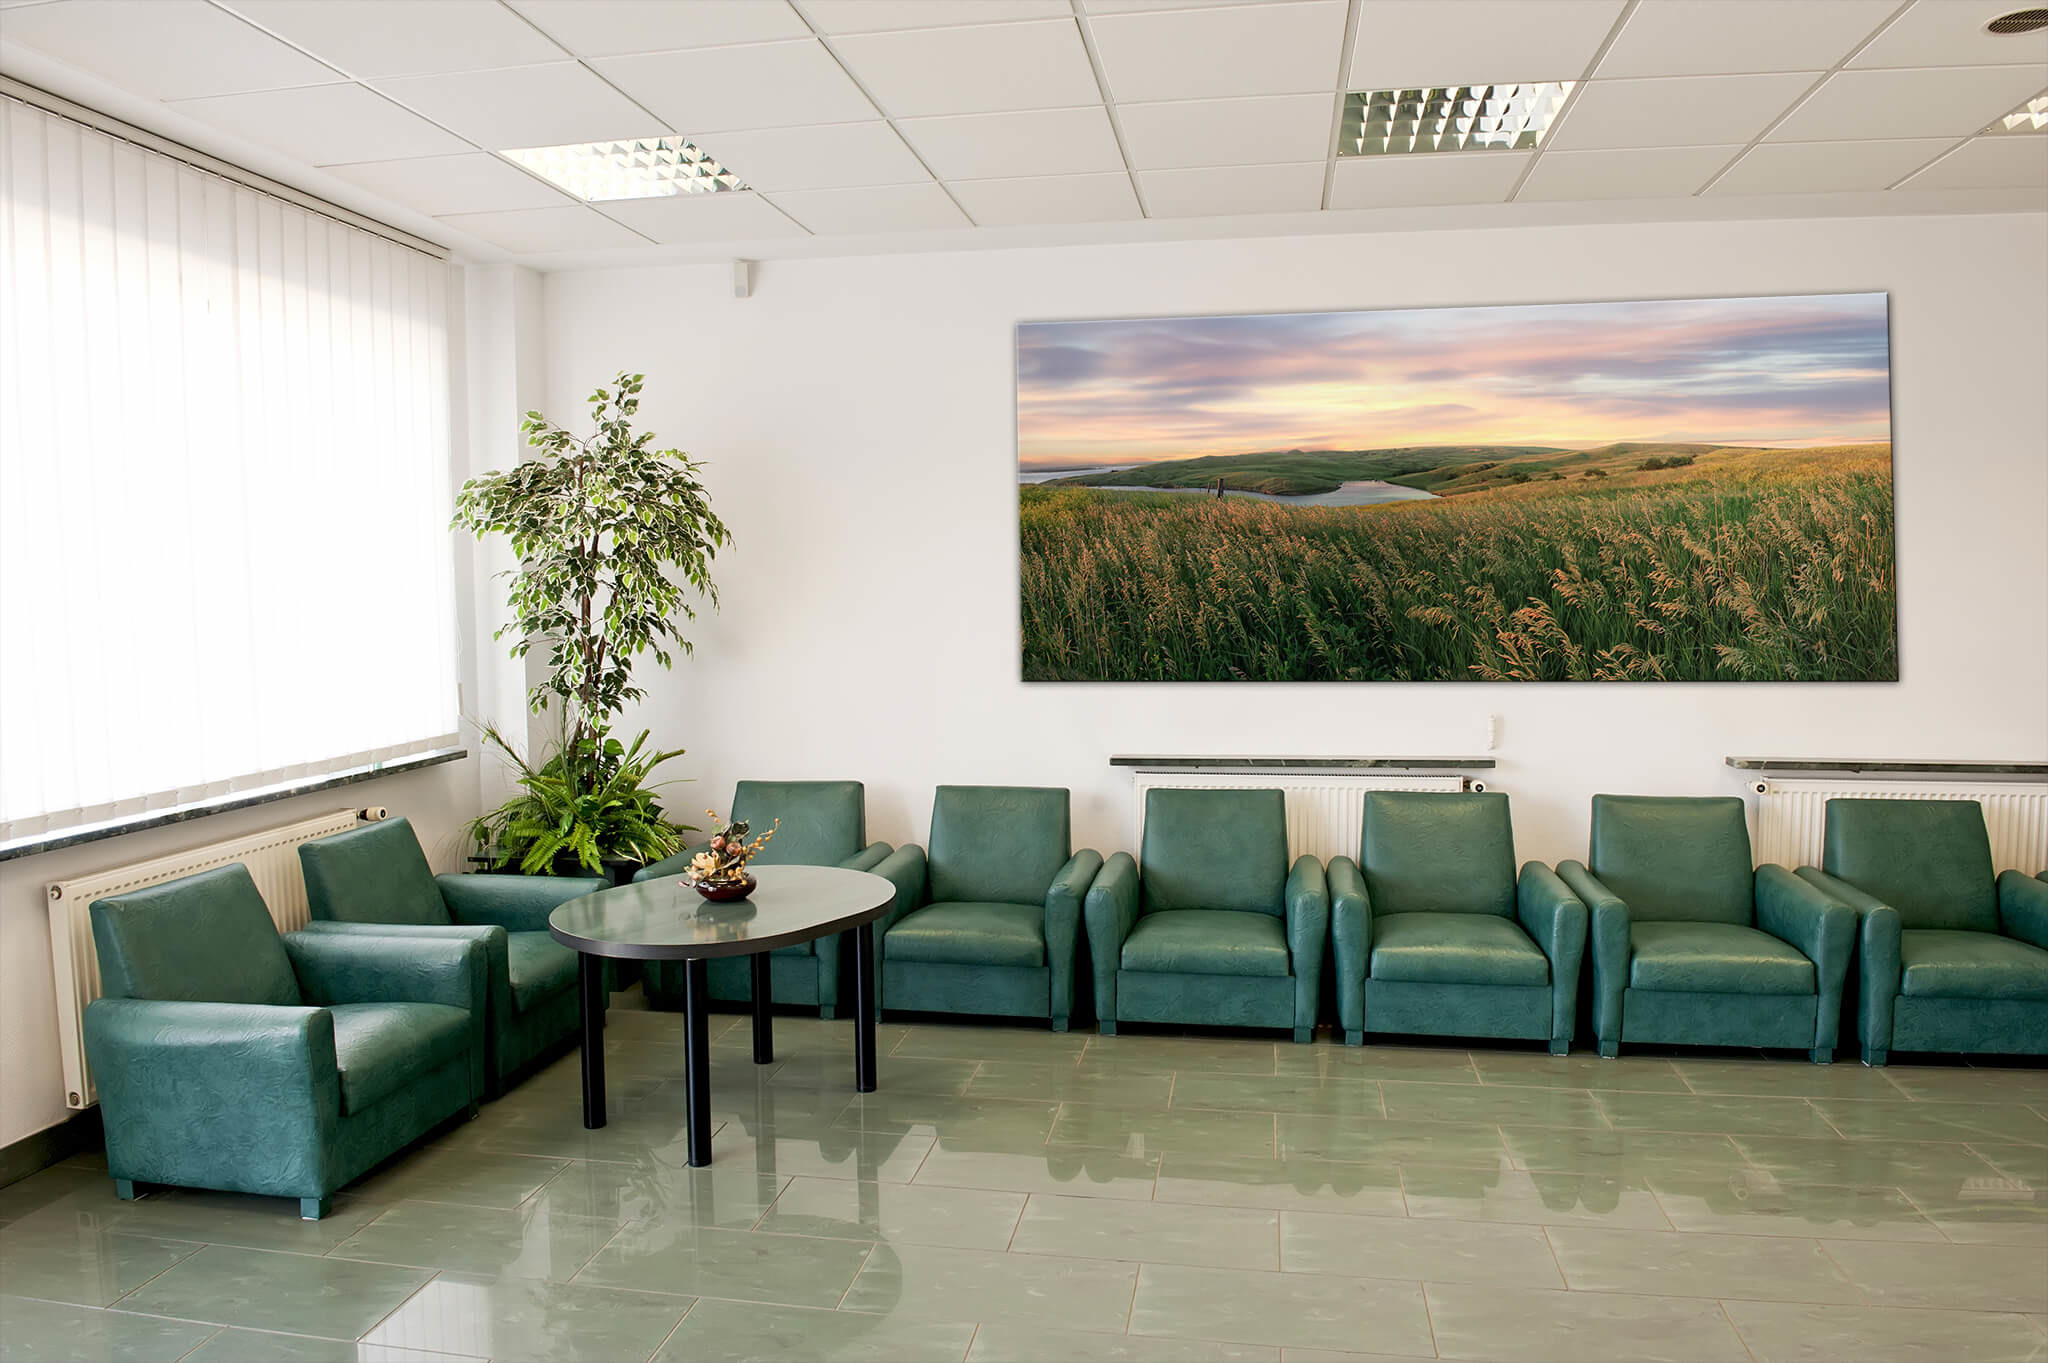 2048x1363 I provide ideal imagery for clinic settings including hospitals, clinics, dental  offices, and other healthcare spaces.